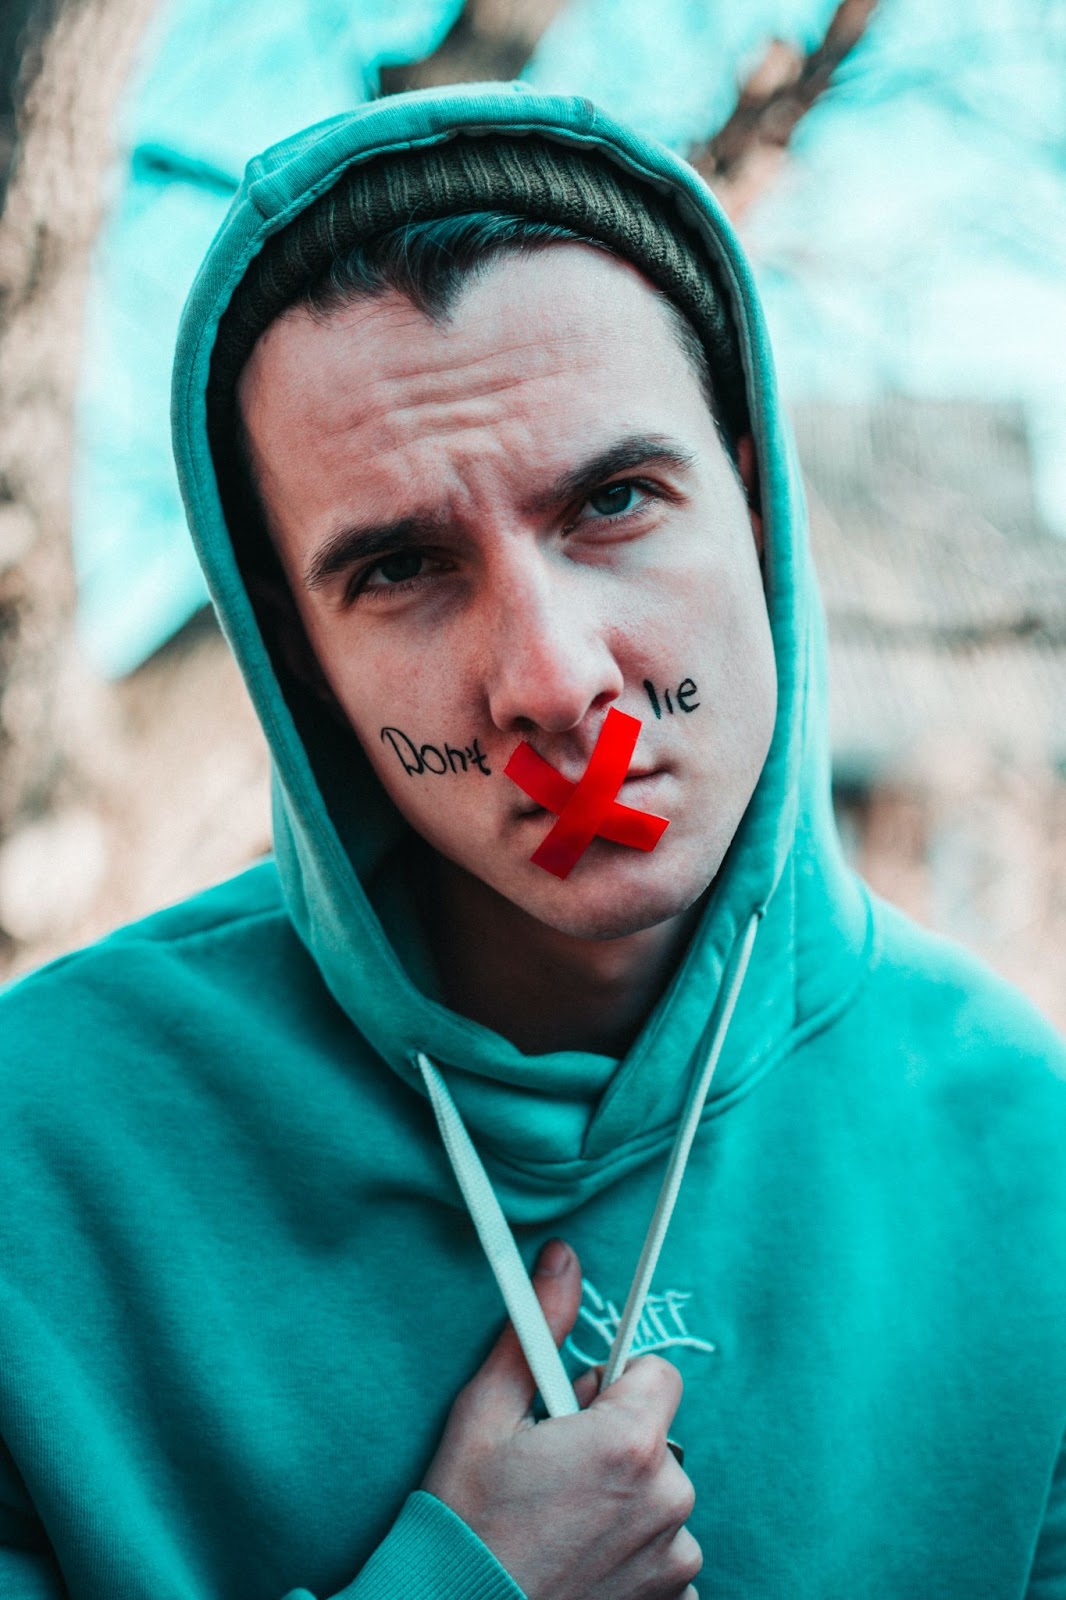 A picture of a man's face with red tap over his mouth in an X with the words don't lie written on his face, introducing the lyric "we all lie"